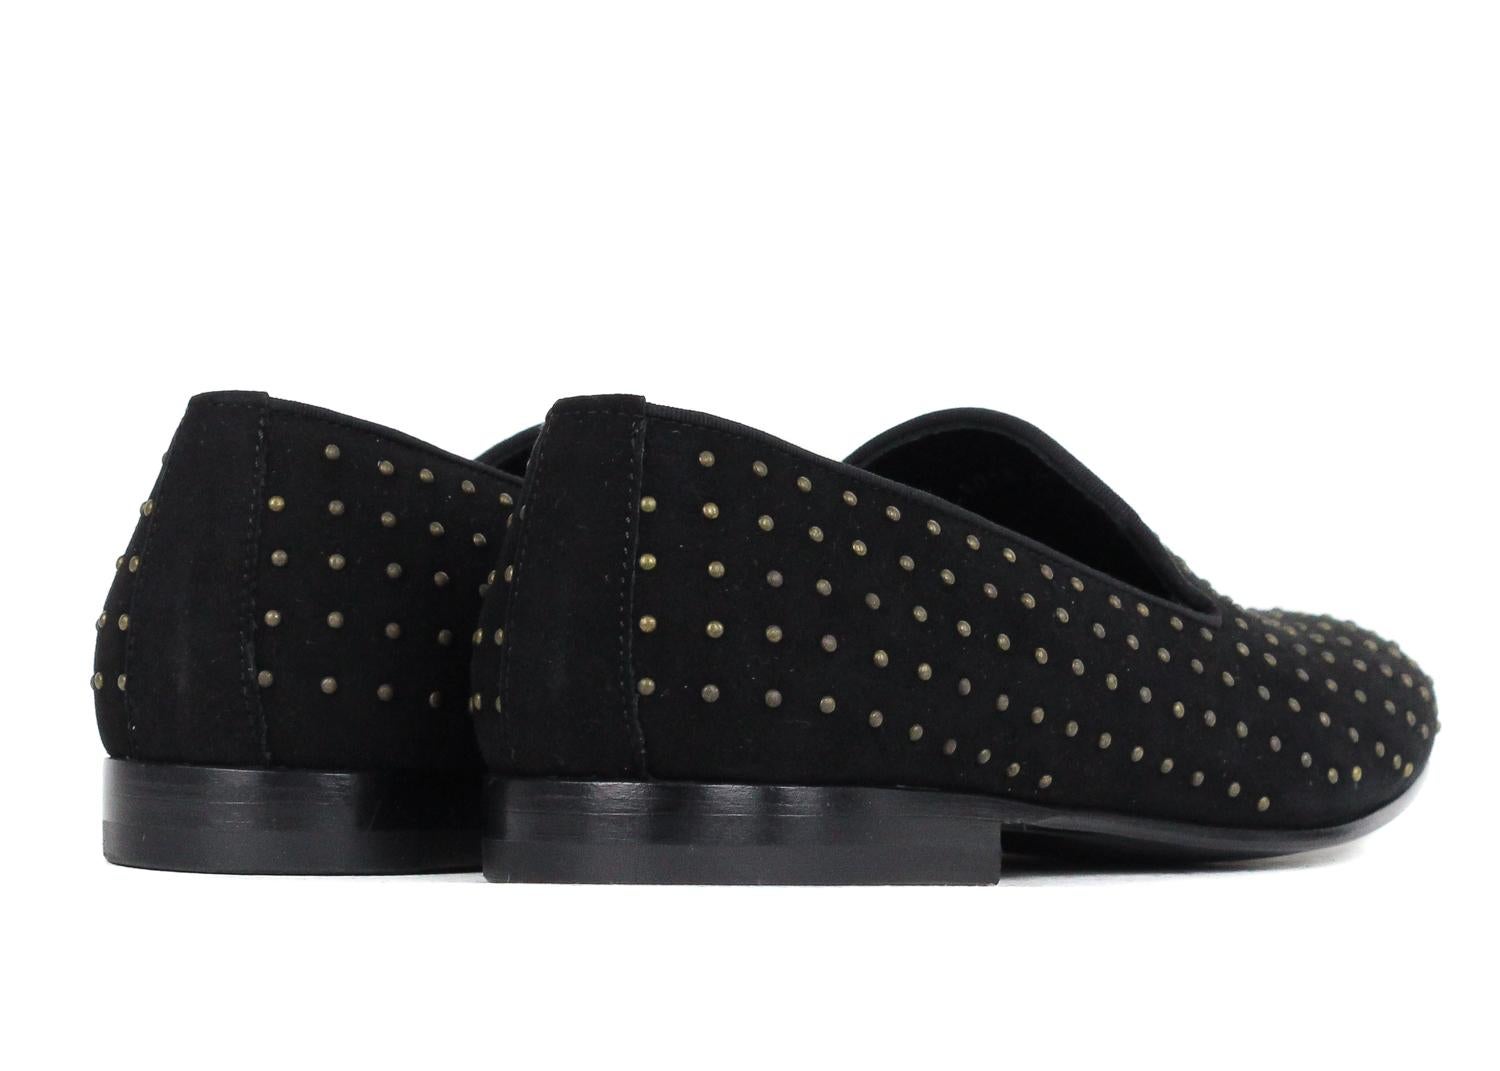 Roberto Cavalli Black Suede Antique Gold Studded Loafers  In New Condition For Sale In Brooklyn, NY